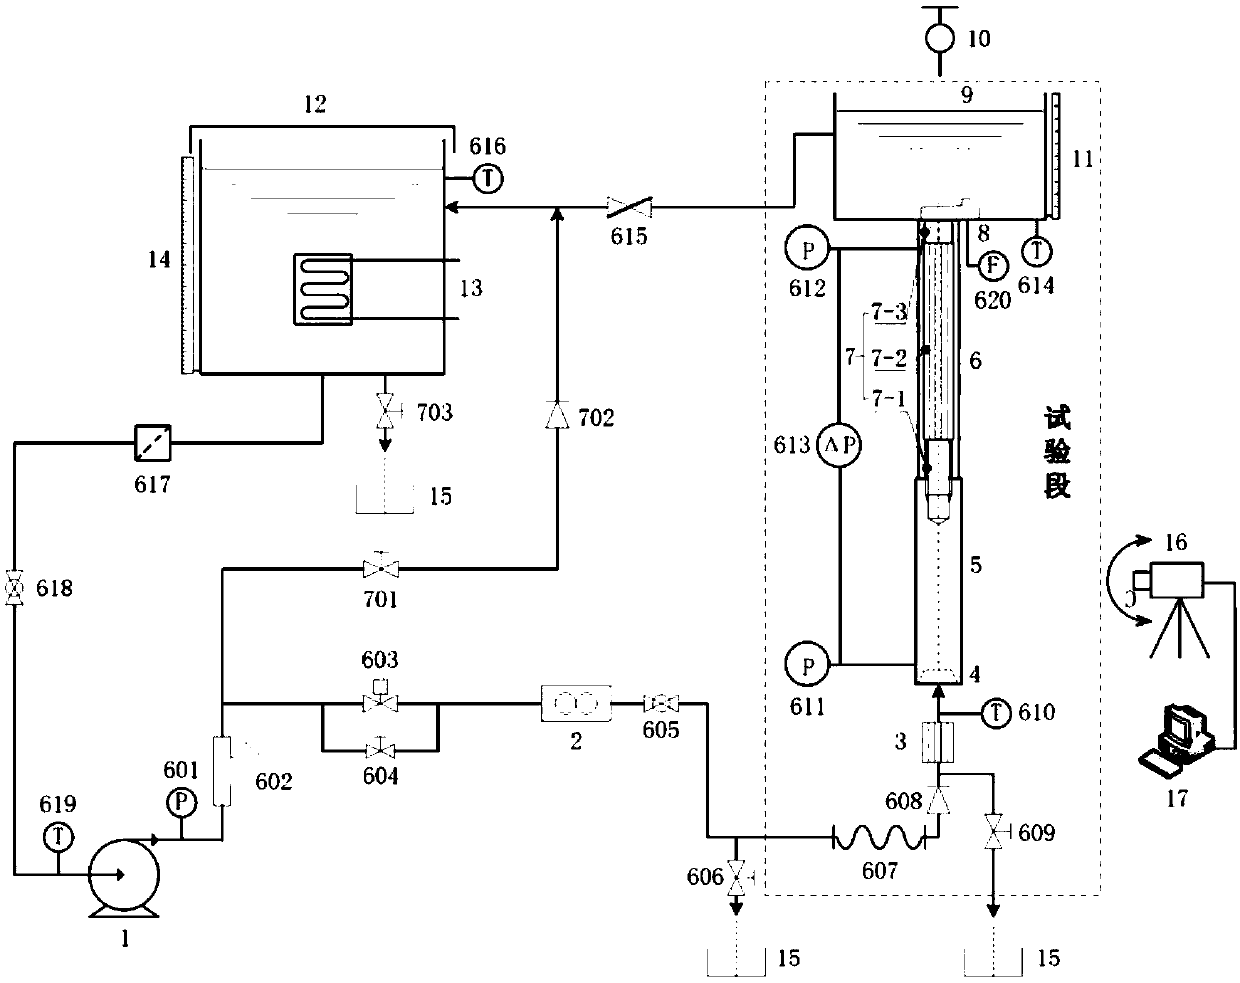 A test system and test method for a nuclear reactor passive shutdown device